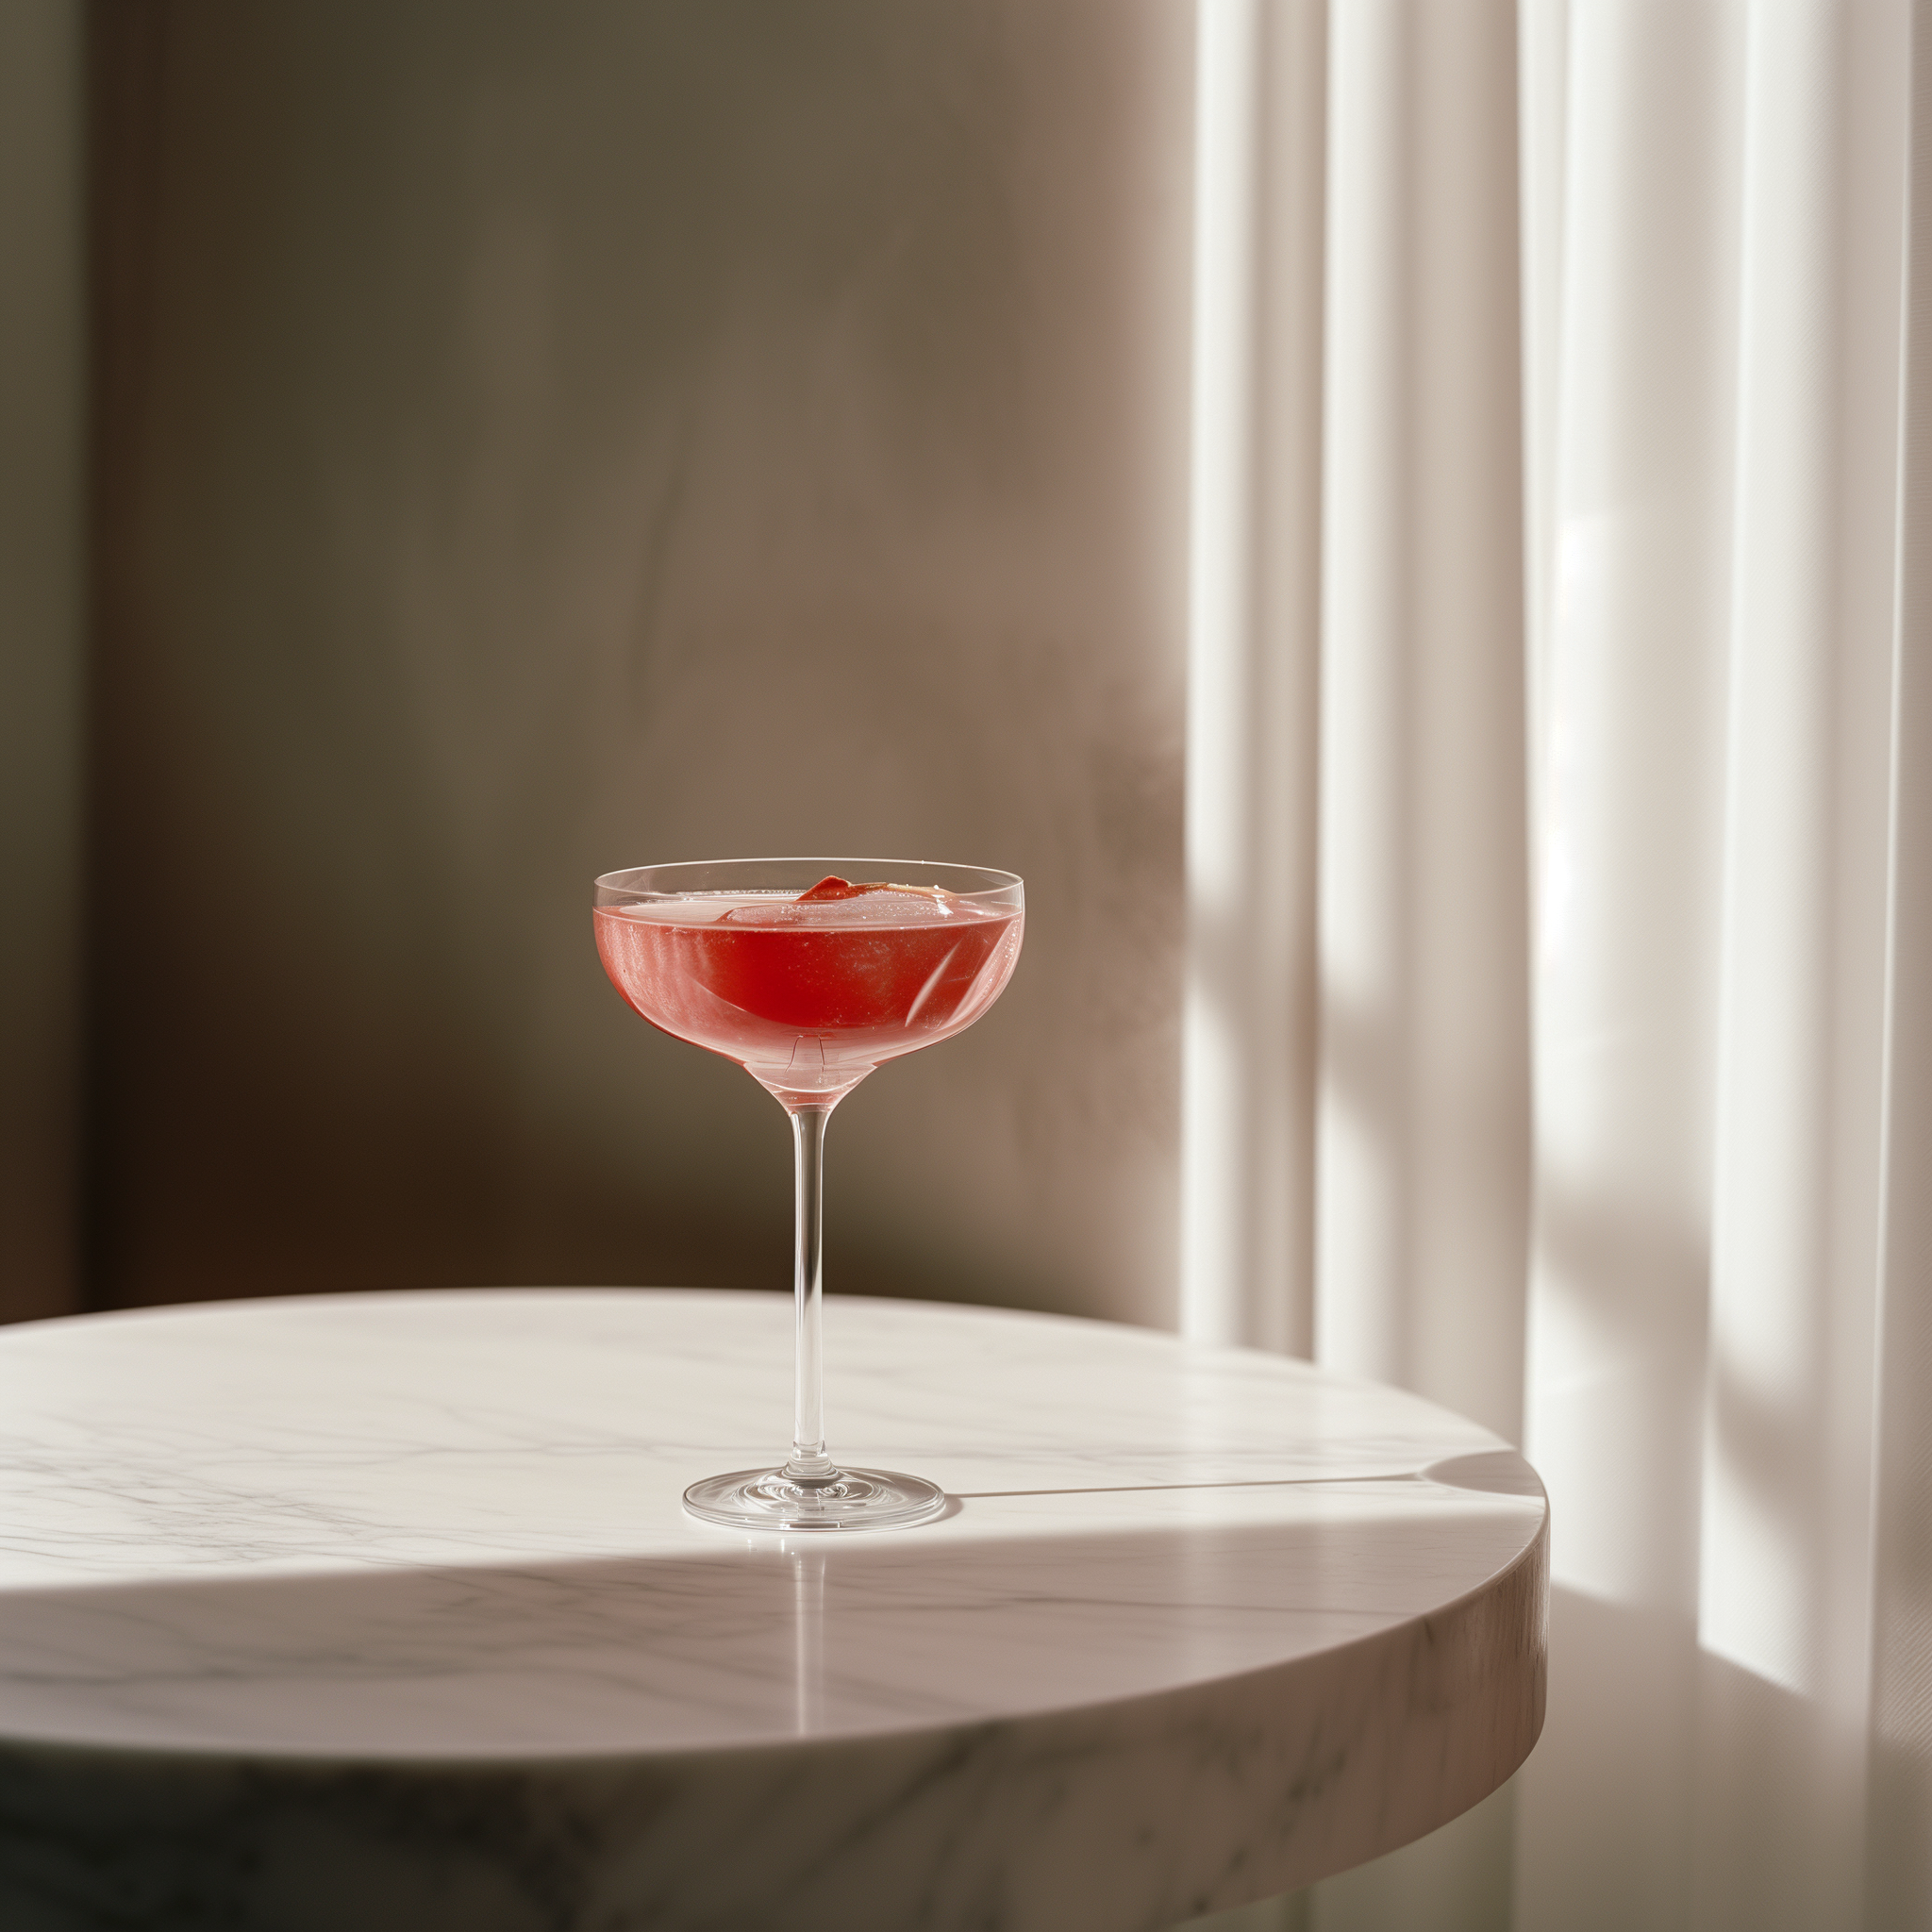 A cocktail on a table | Source: Midjourney